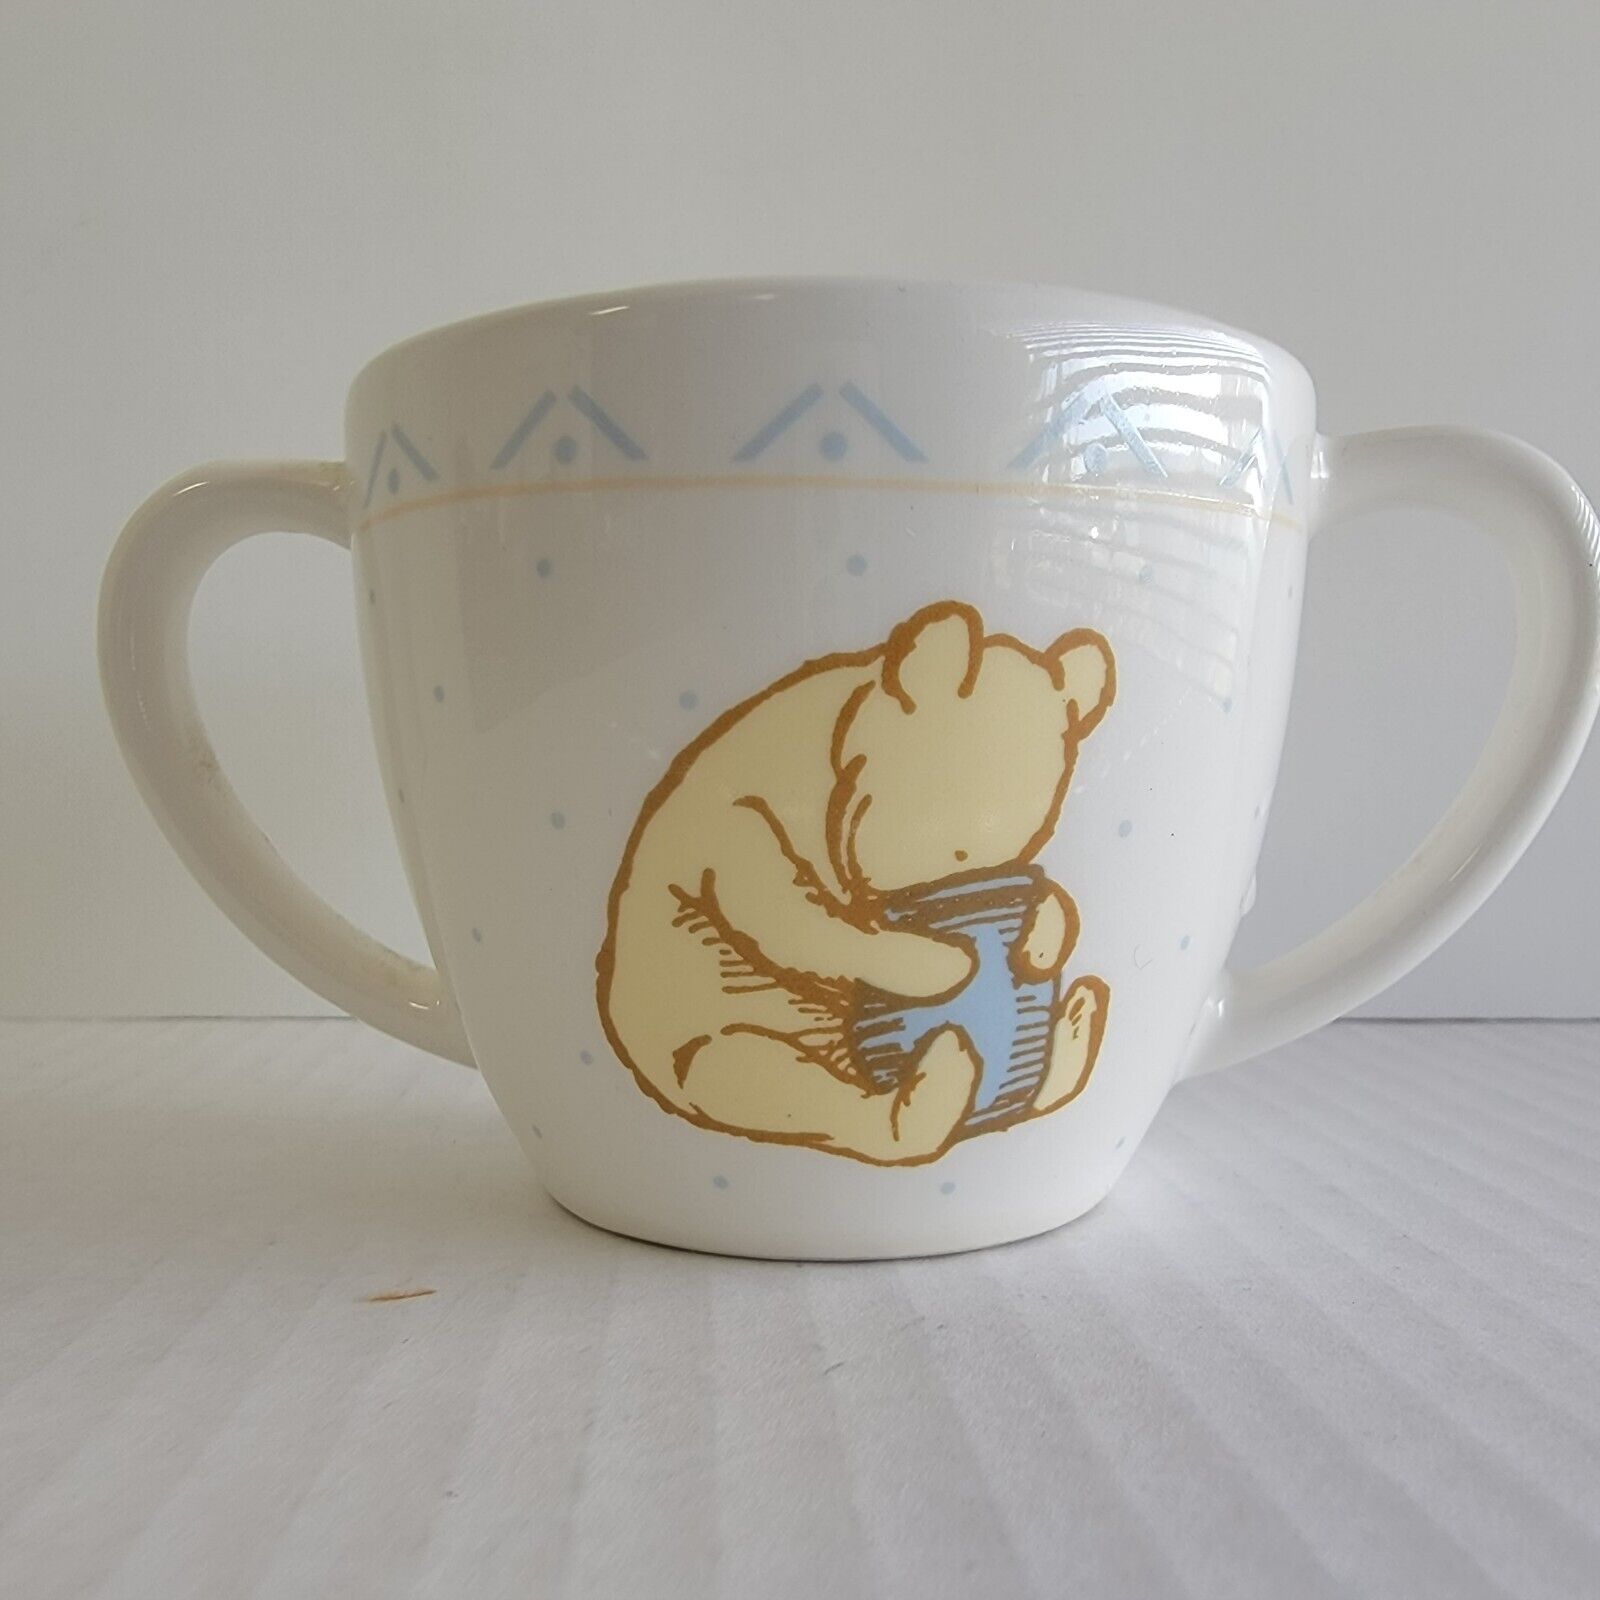 Disney Classic Winnie The Pooh Small Child\'s Cup Vintage Baby Cup by Charpente